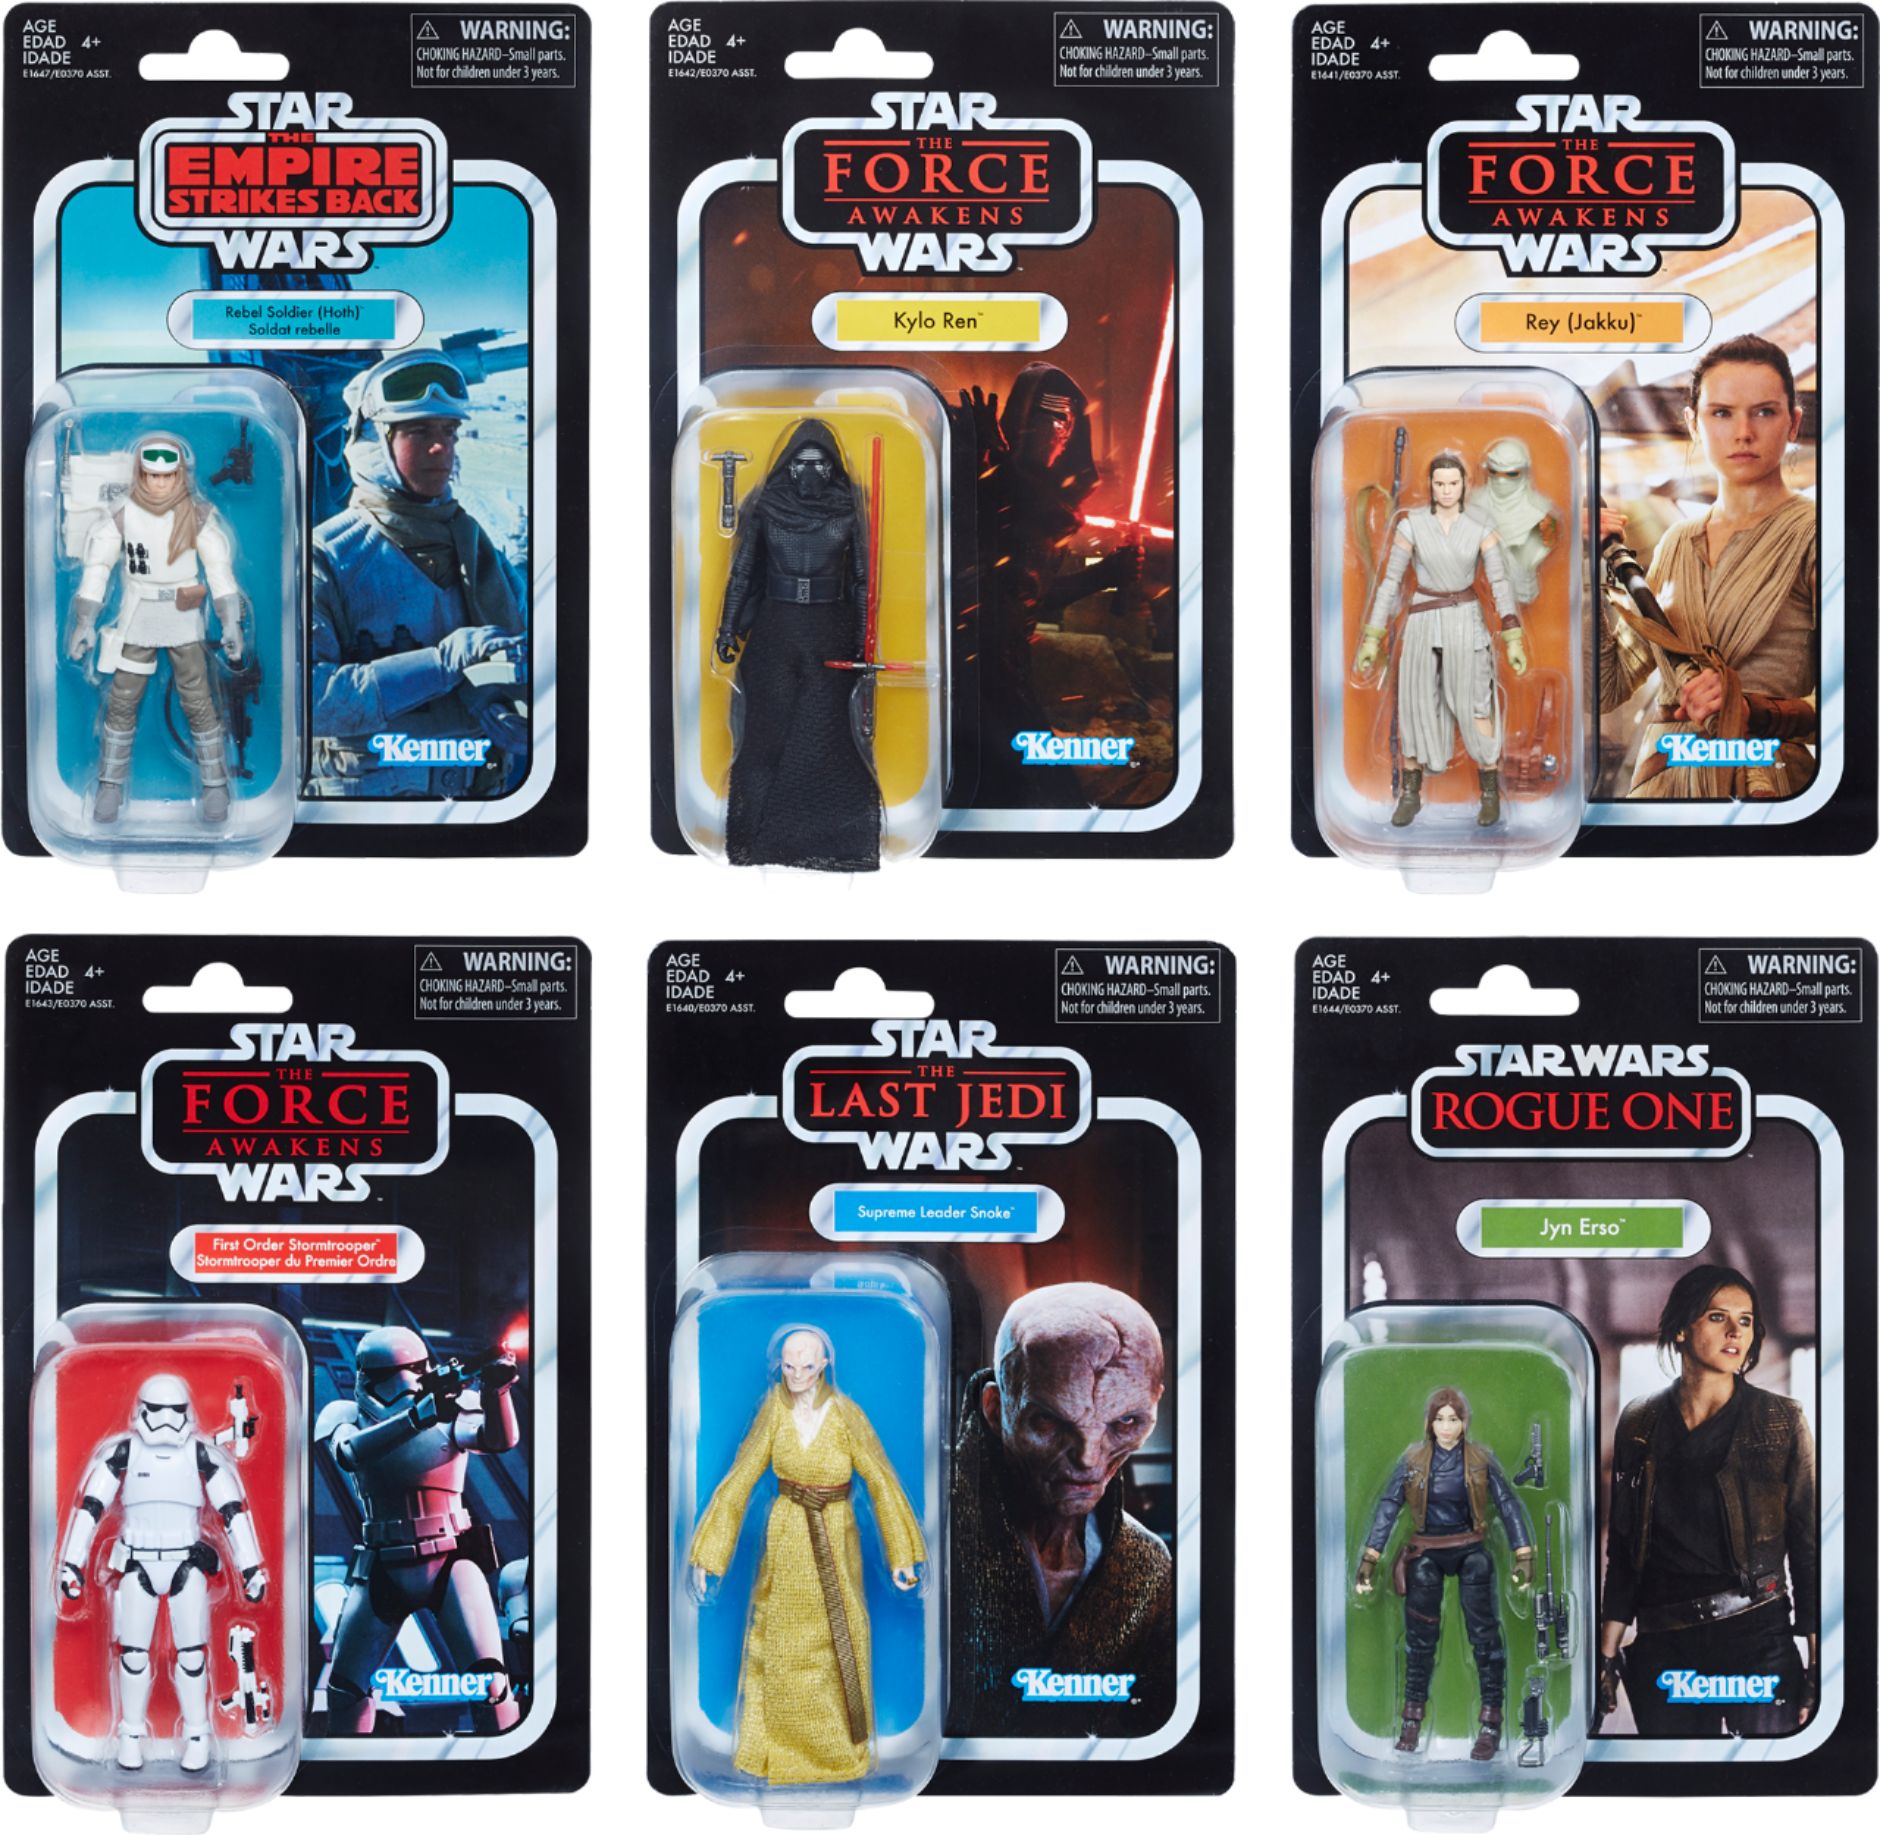 where can i buy star wars figures